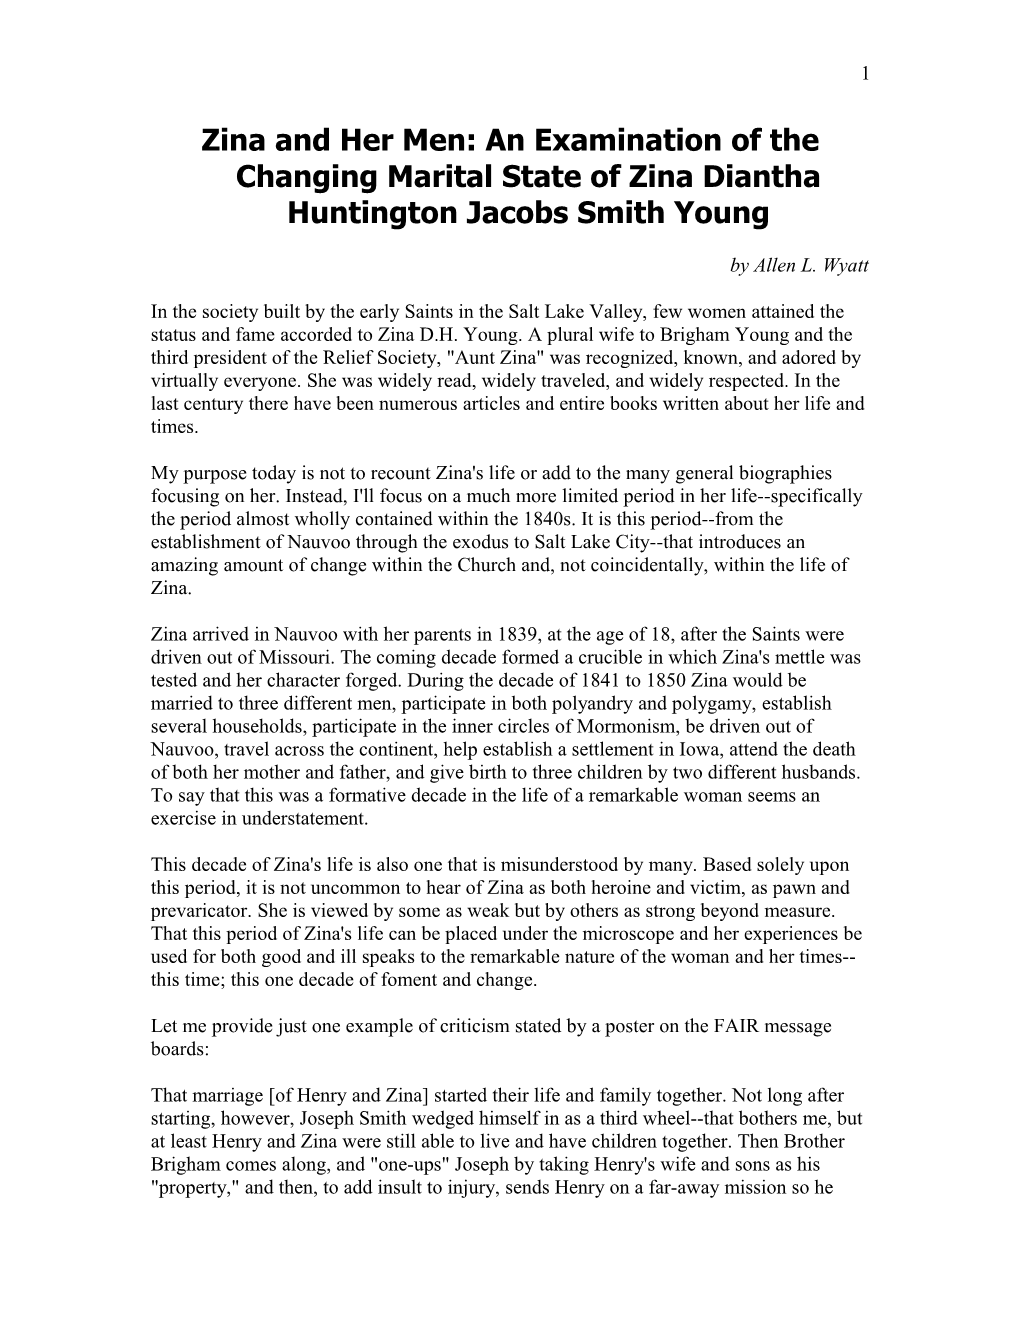 Zina and Her Men: an Examination of the Changing Marital State of Zina Diantha Huntington